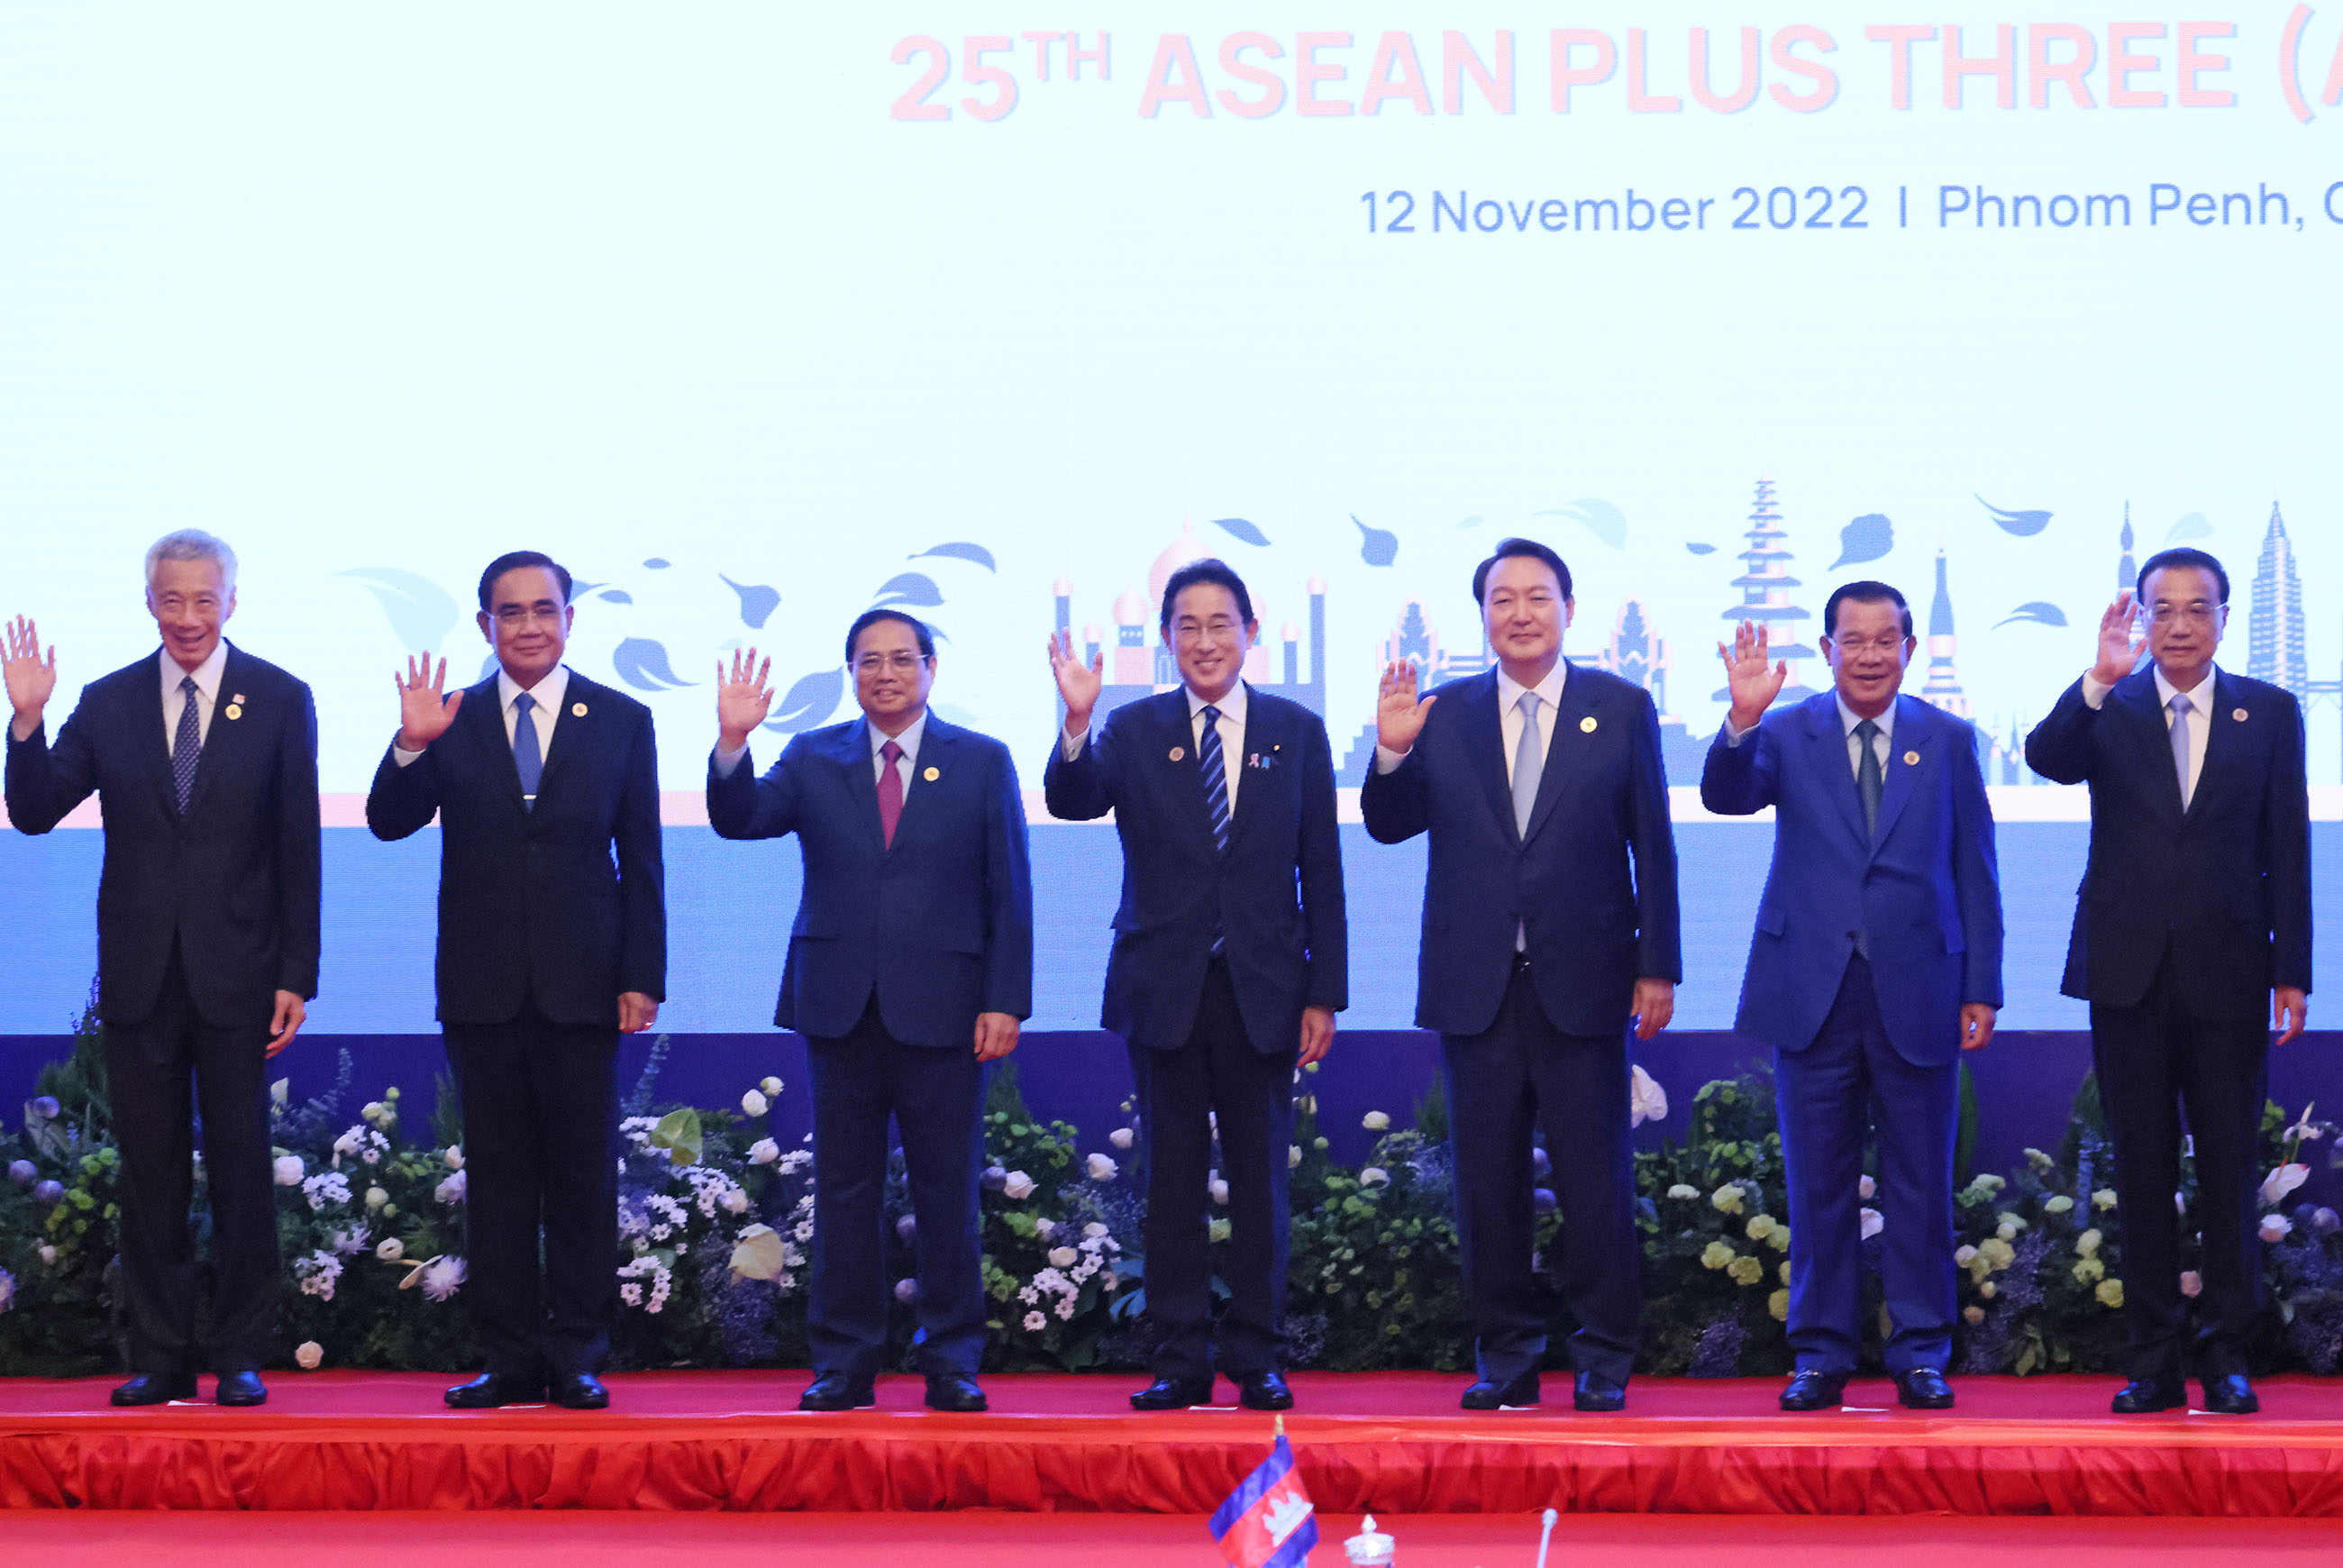 Photograph of the Prime Minister at a photograph session with ASEAN Plus Three leaders (3)